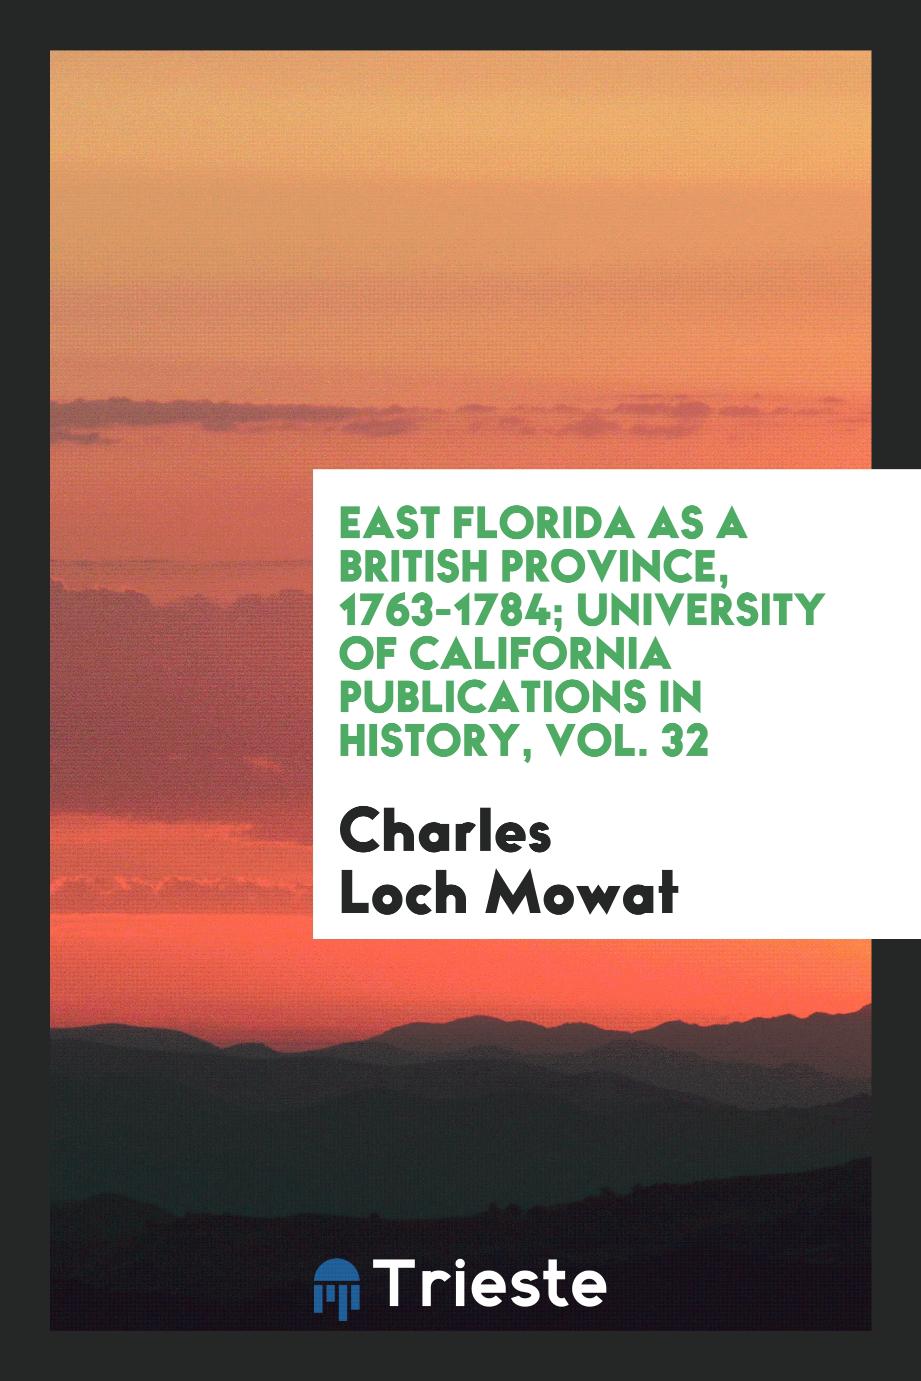 East Florida as a British Province, 1763-1784; University of California Publications in History, Vol. 32